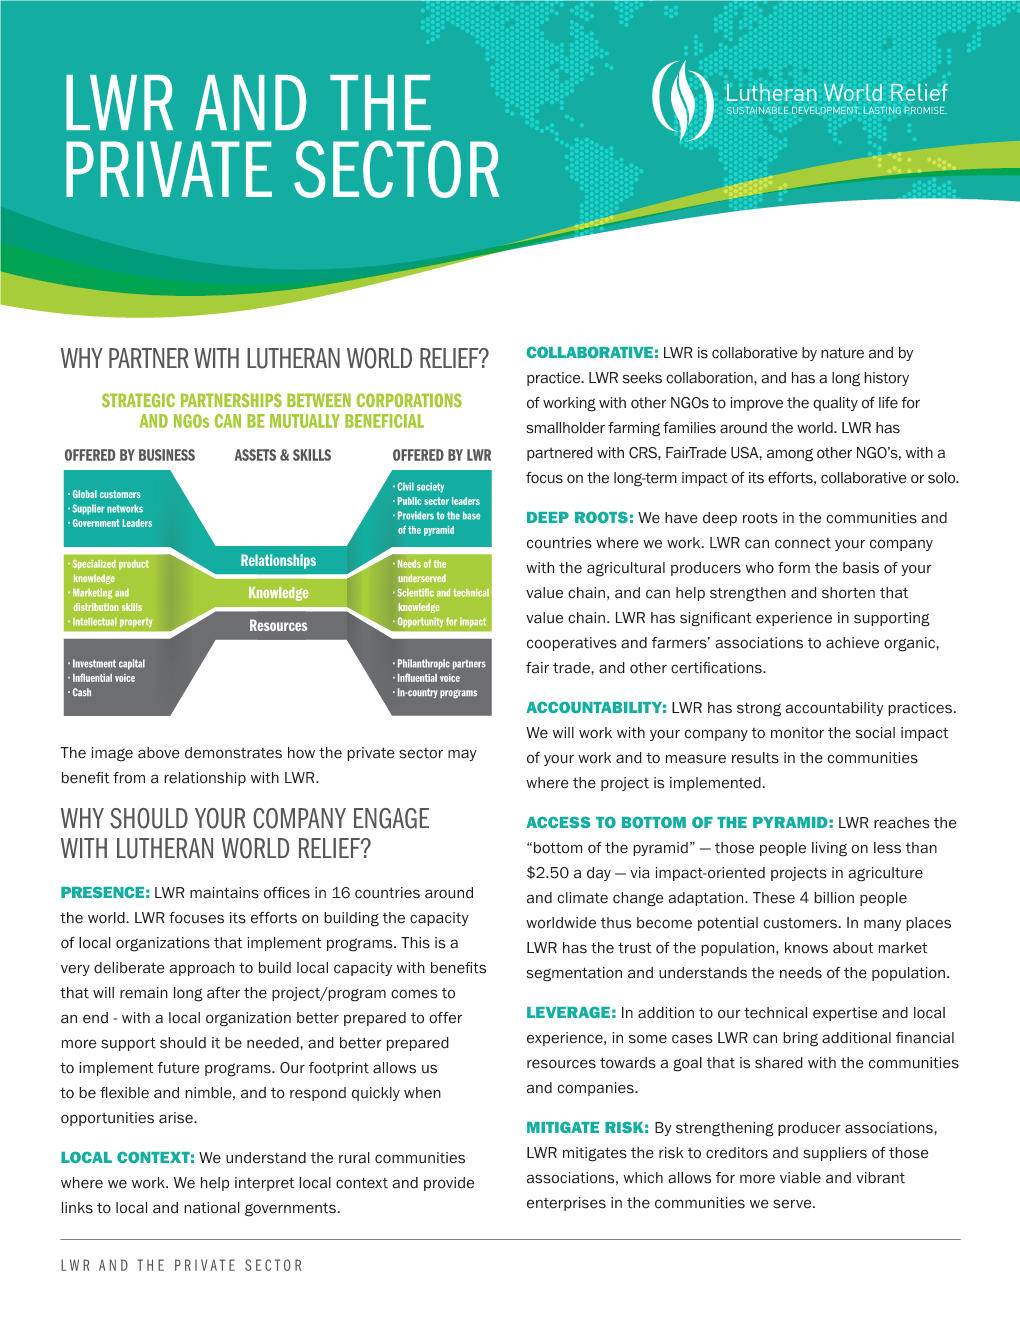 Lwr and the Private Sector